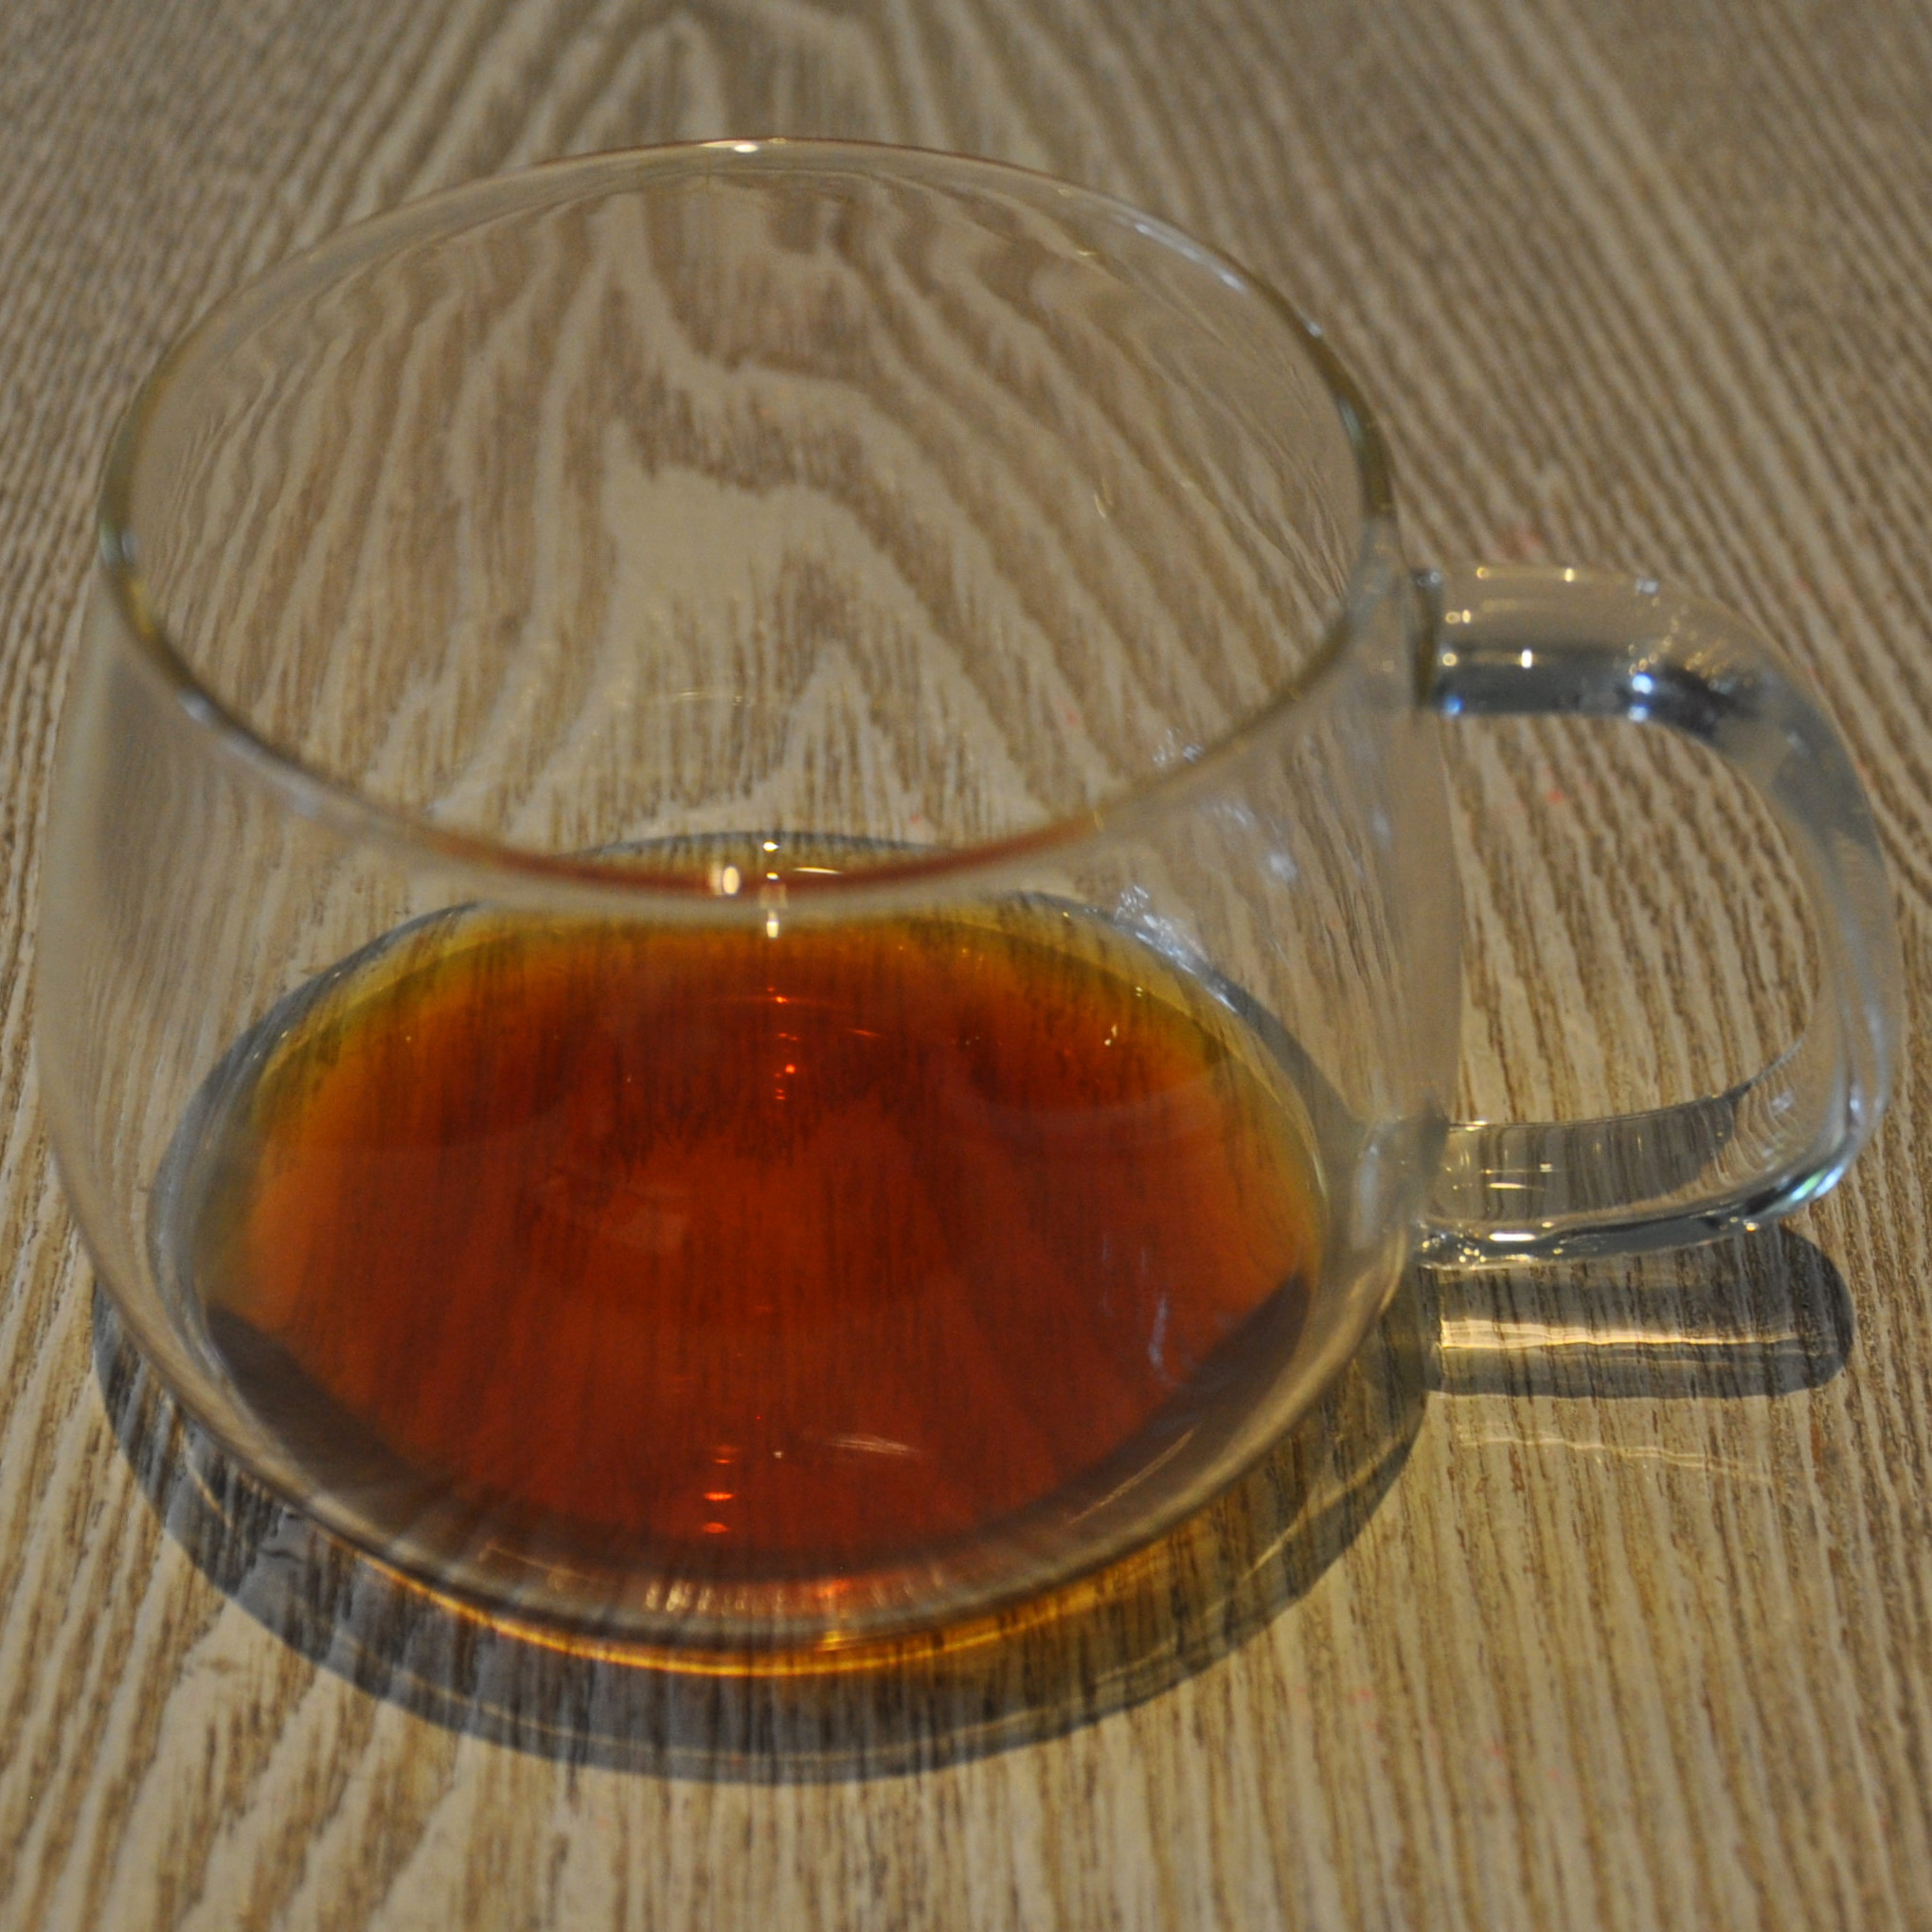 The remains of my single-origin Kenyan pour-over in a glass mug, as served in Blue Bottle in the Aoyama district of Tokyo.